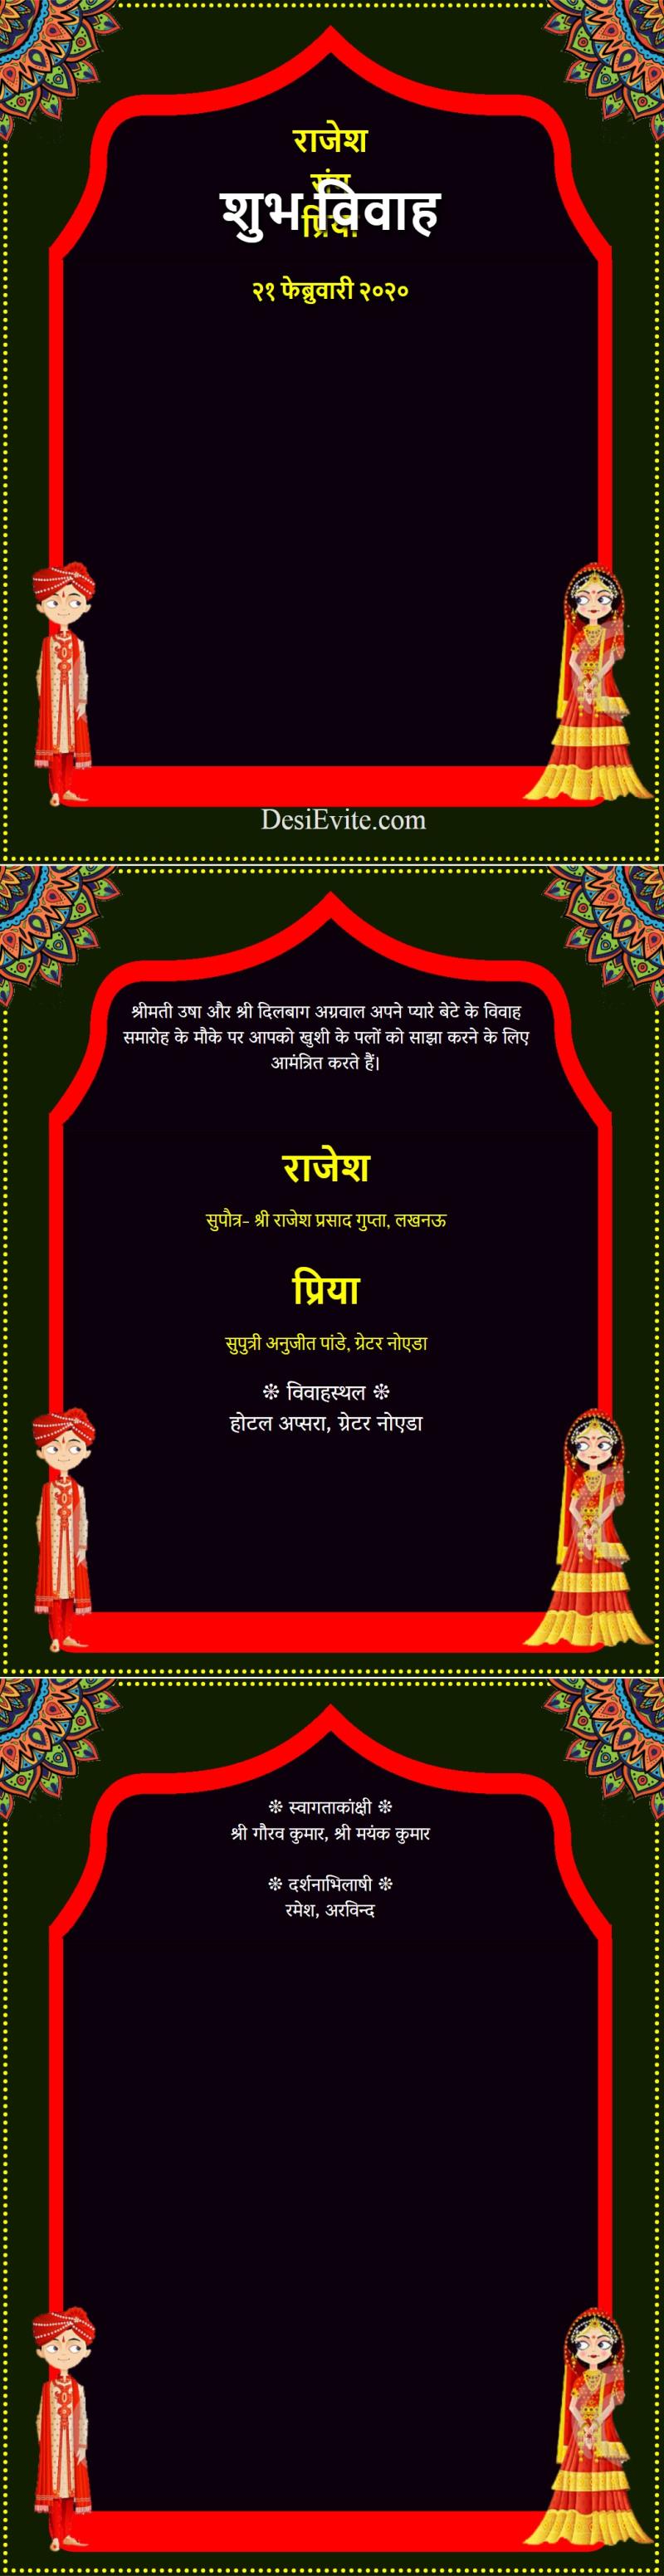 Hindi wedding invitation card with 3 pages template 147